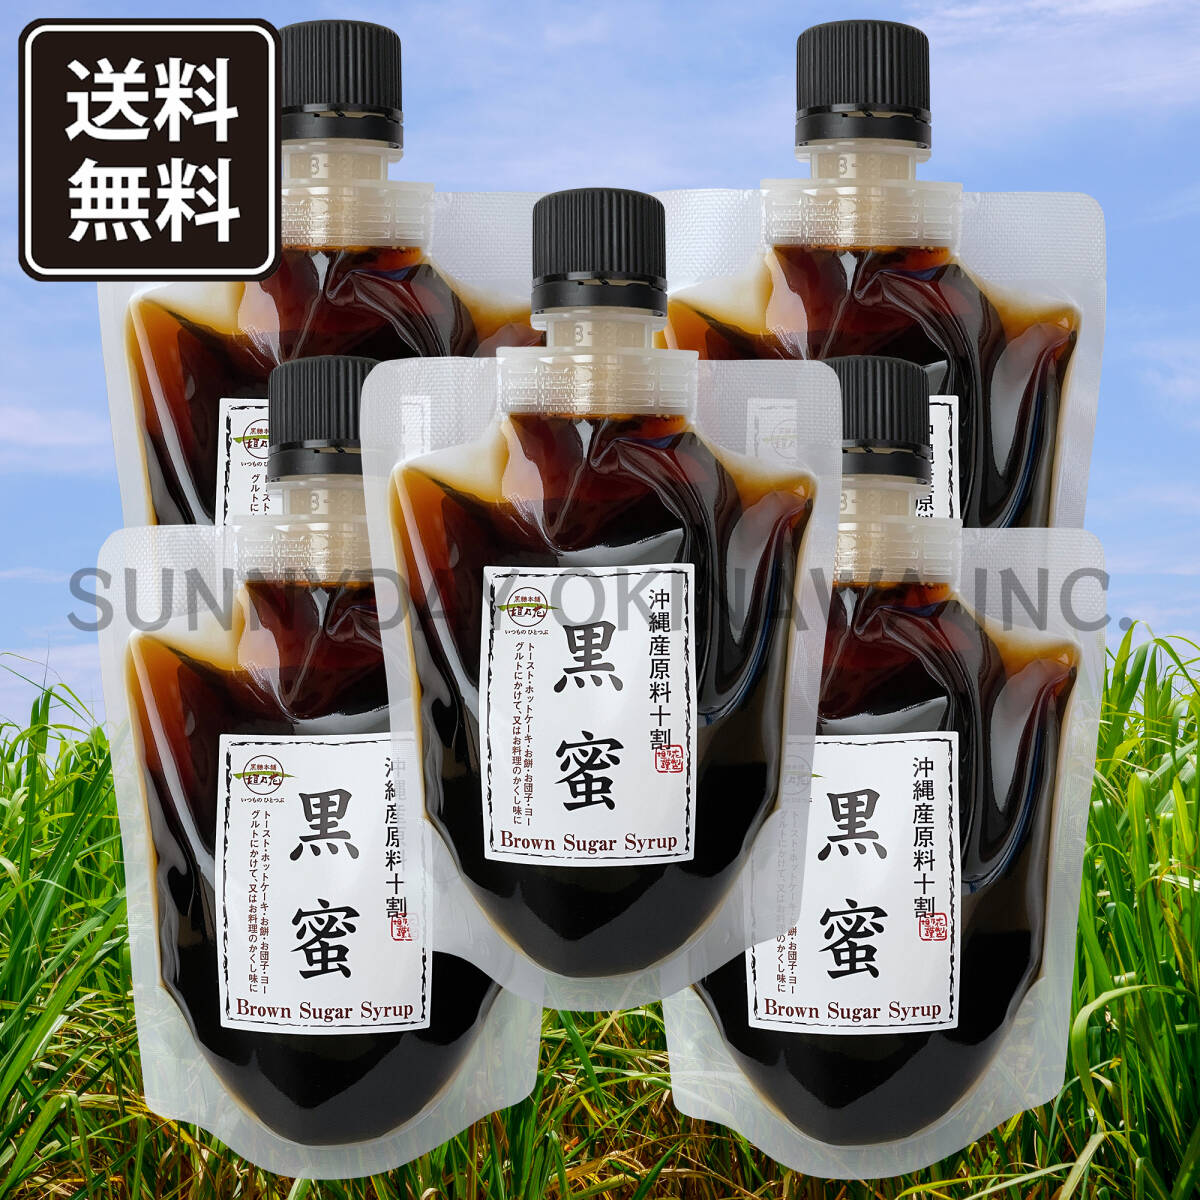 [ Okinawa prefecture production feedstocks 10 break up ] dark molasses 180g 5 sack brown sugar head office .. flower brown sugar syrup . earth production your order 